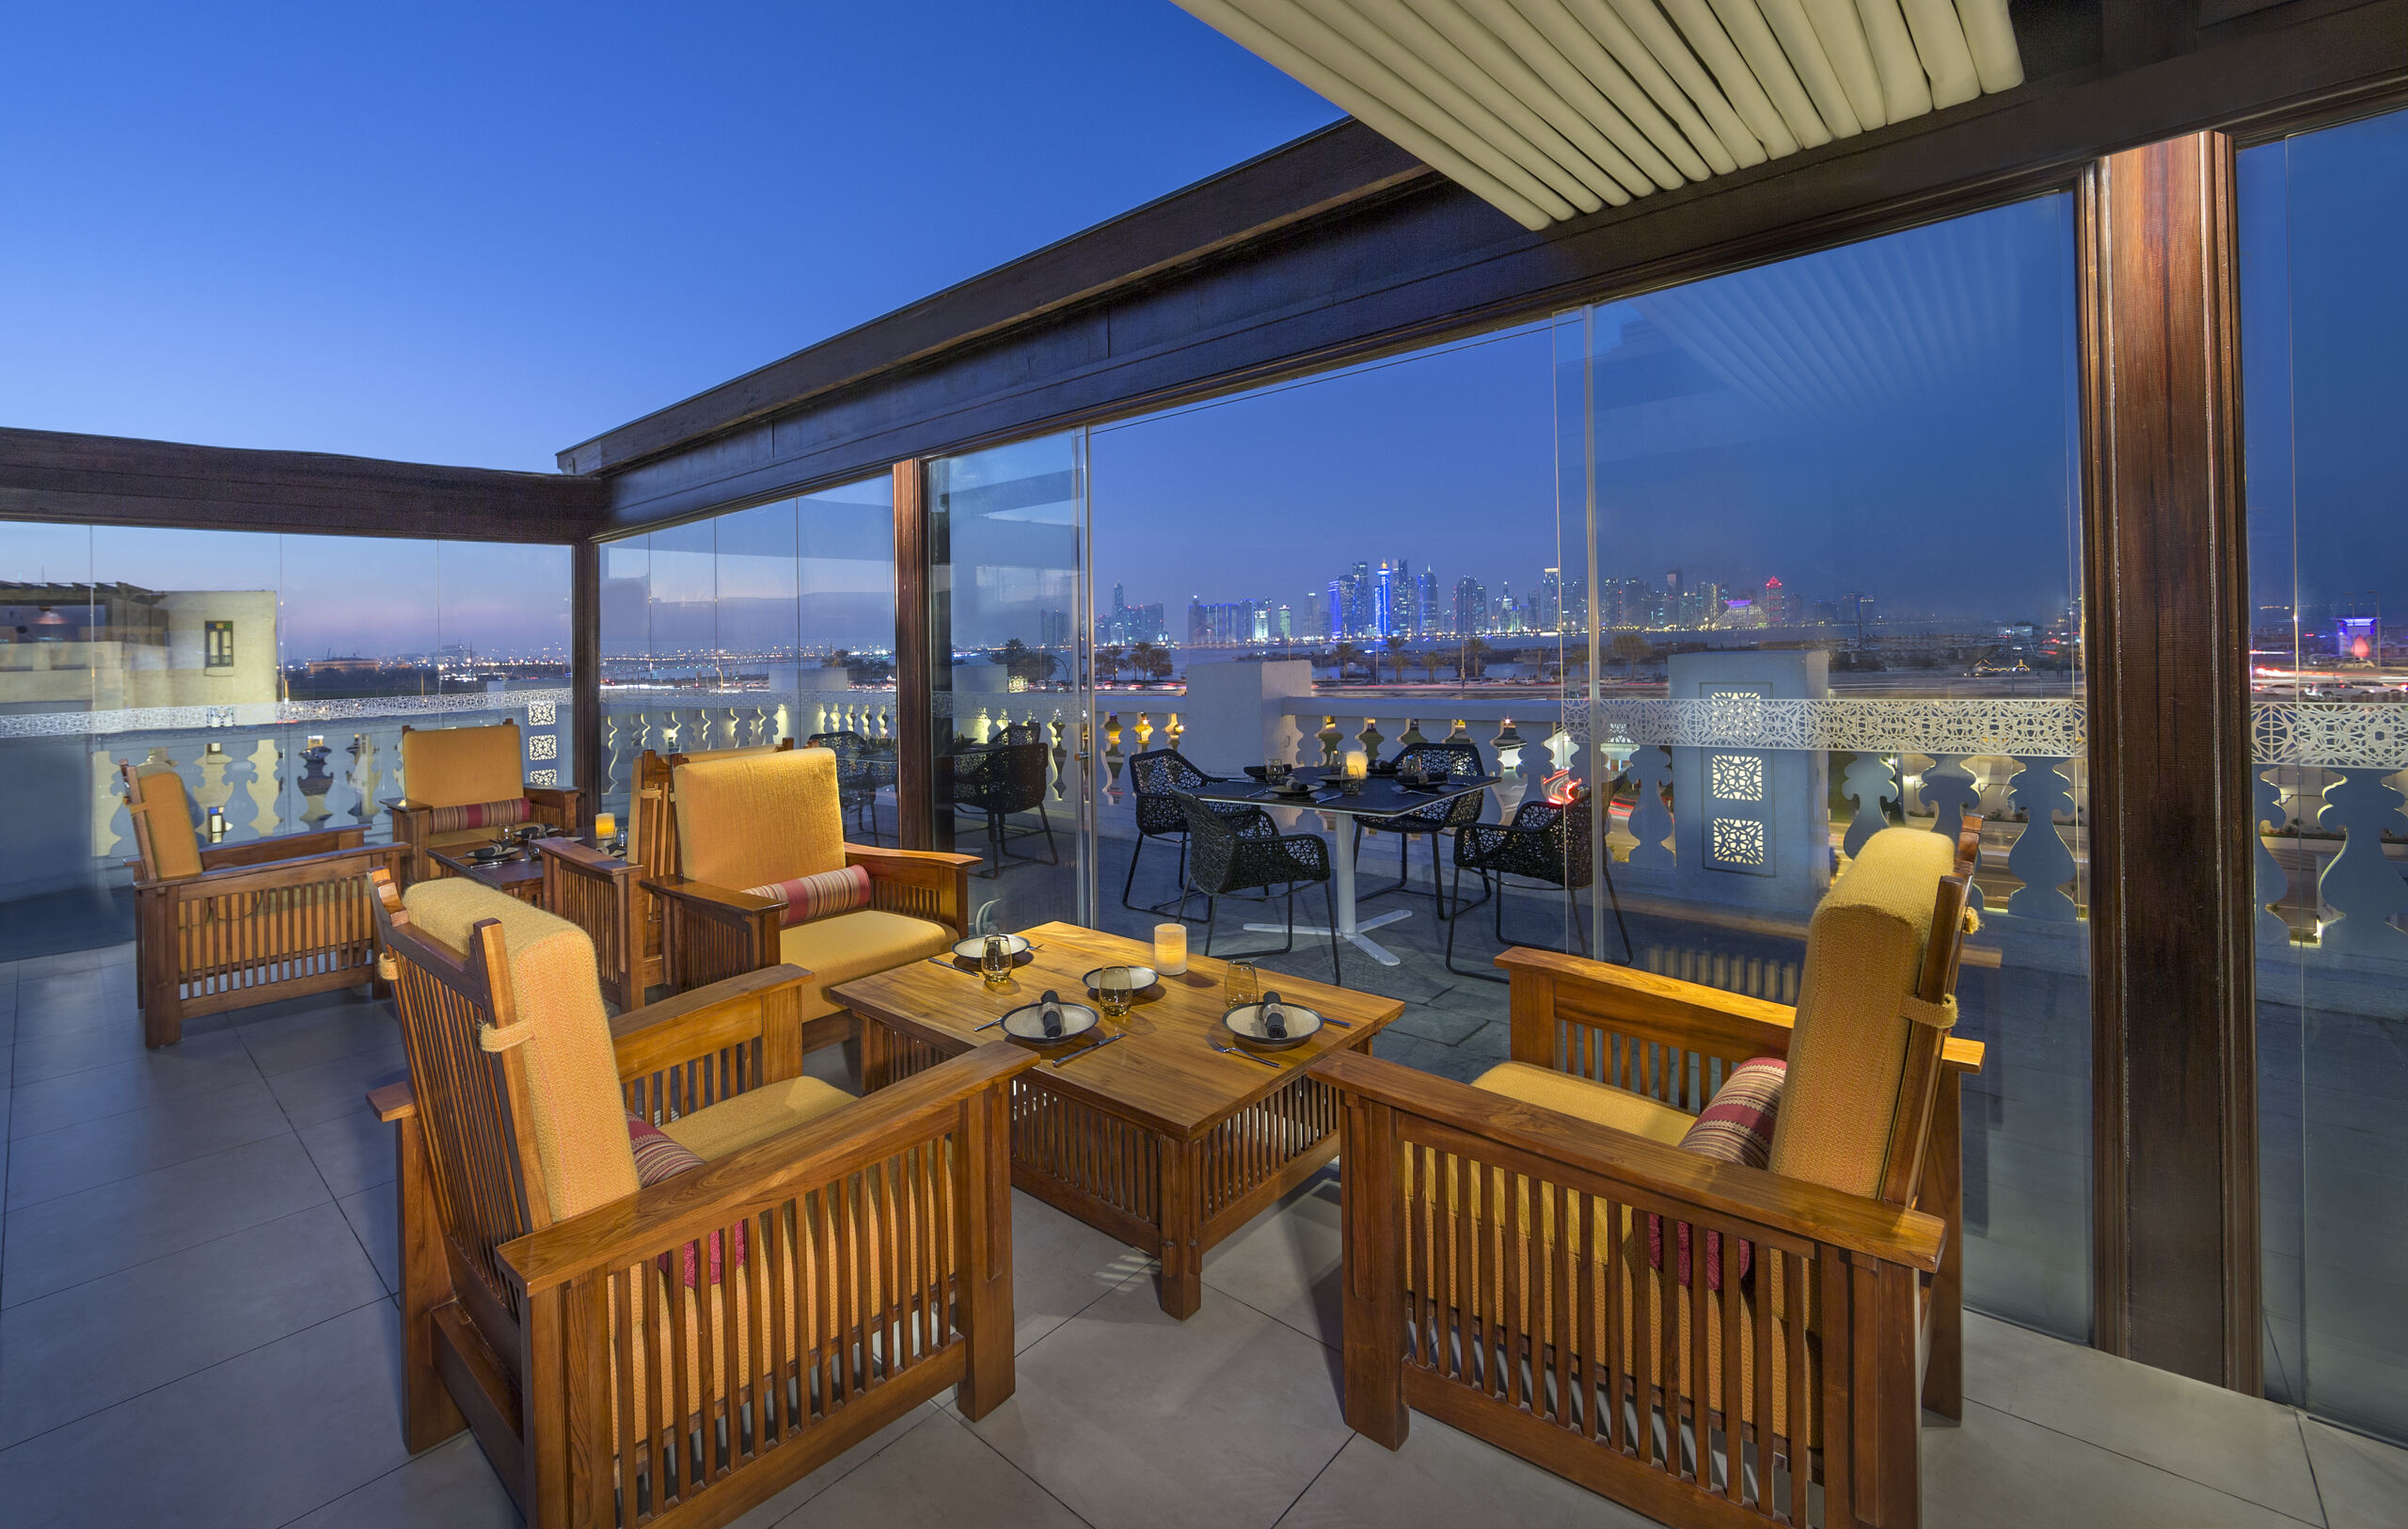 A rooftop restaurant. Inside a glass-walled room with a retractable ceiling are two low wooden tables, each surrounded by three wooden armchairs with cushions on them. Outside the glass wall is a terrace with tables that appear to be metal, and chairs that appear to be some sort of rattan weave. Beyond the terrace, a city skyline is visible, with a cluster of skyscrapers in the centre. It's dusk.